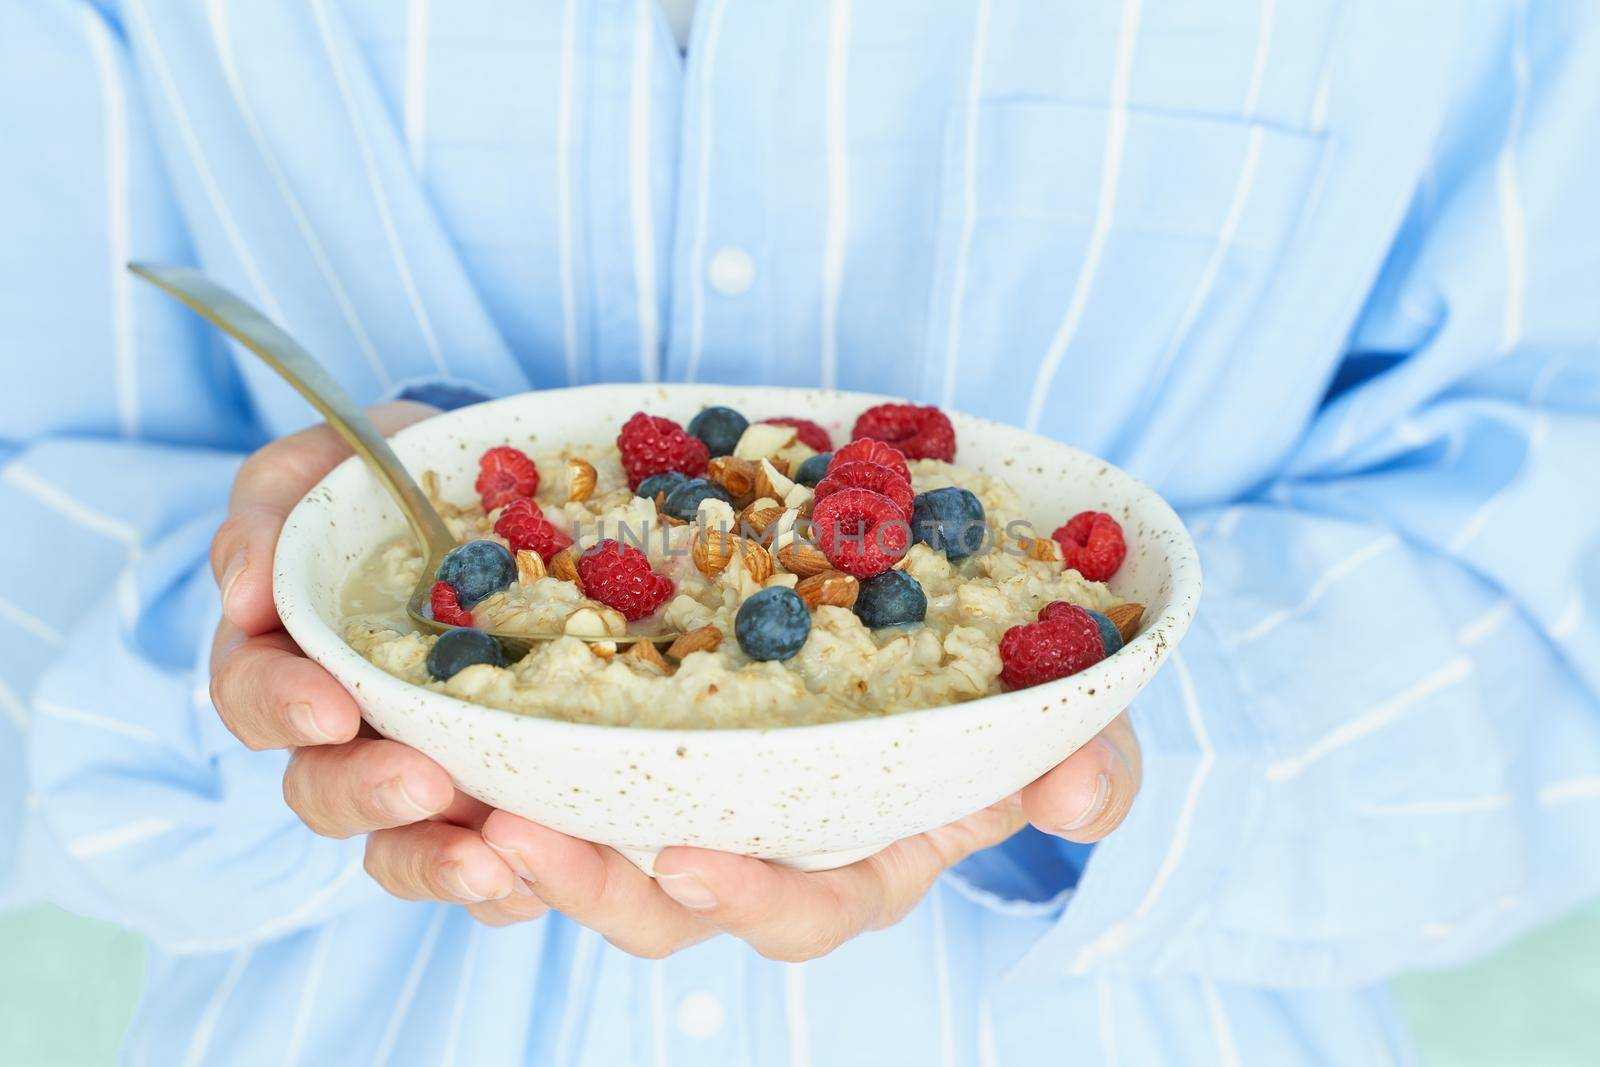 Faceless woman holds in hands breakfast, oatmeal porridge with berries and nuts, healthy food, proper nutrition. Sunshine, early morning, quiet home environment. Side view